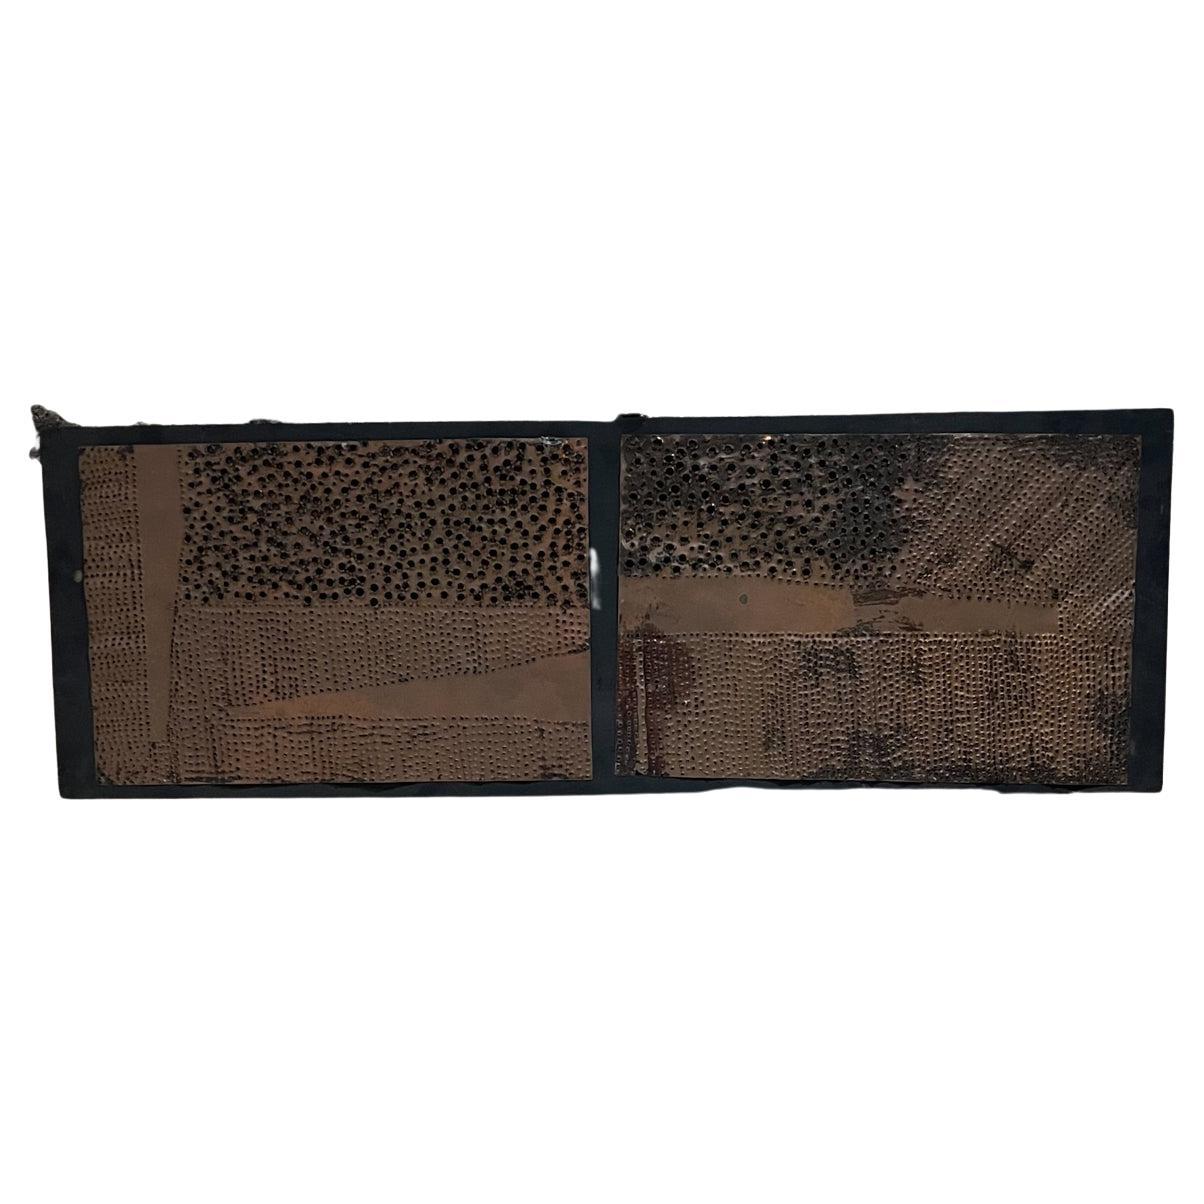 1970s Modern Wall Art Brutalist Perforated copper metal on Wood
In the style of Paul Vanders and Paul Evans
11.75 tall x 35 w x 1 d
Preowned original vintage condition unrestored.
Refer to images
Delivery to LA OC Palm Springs.